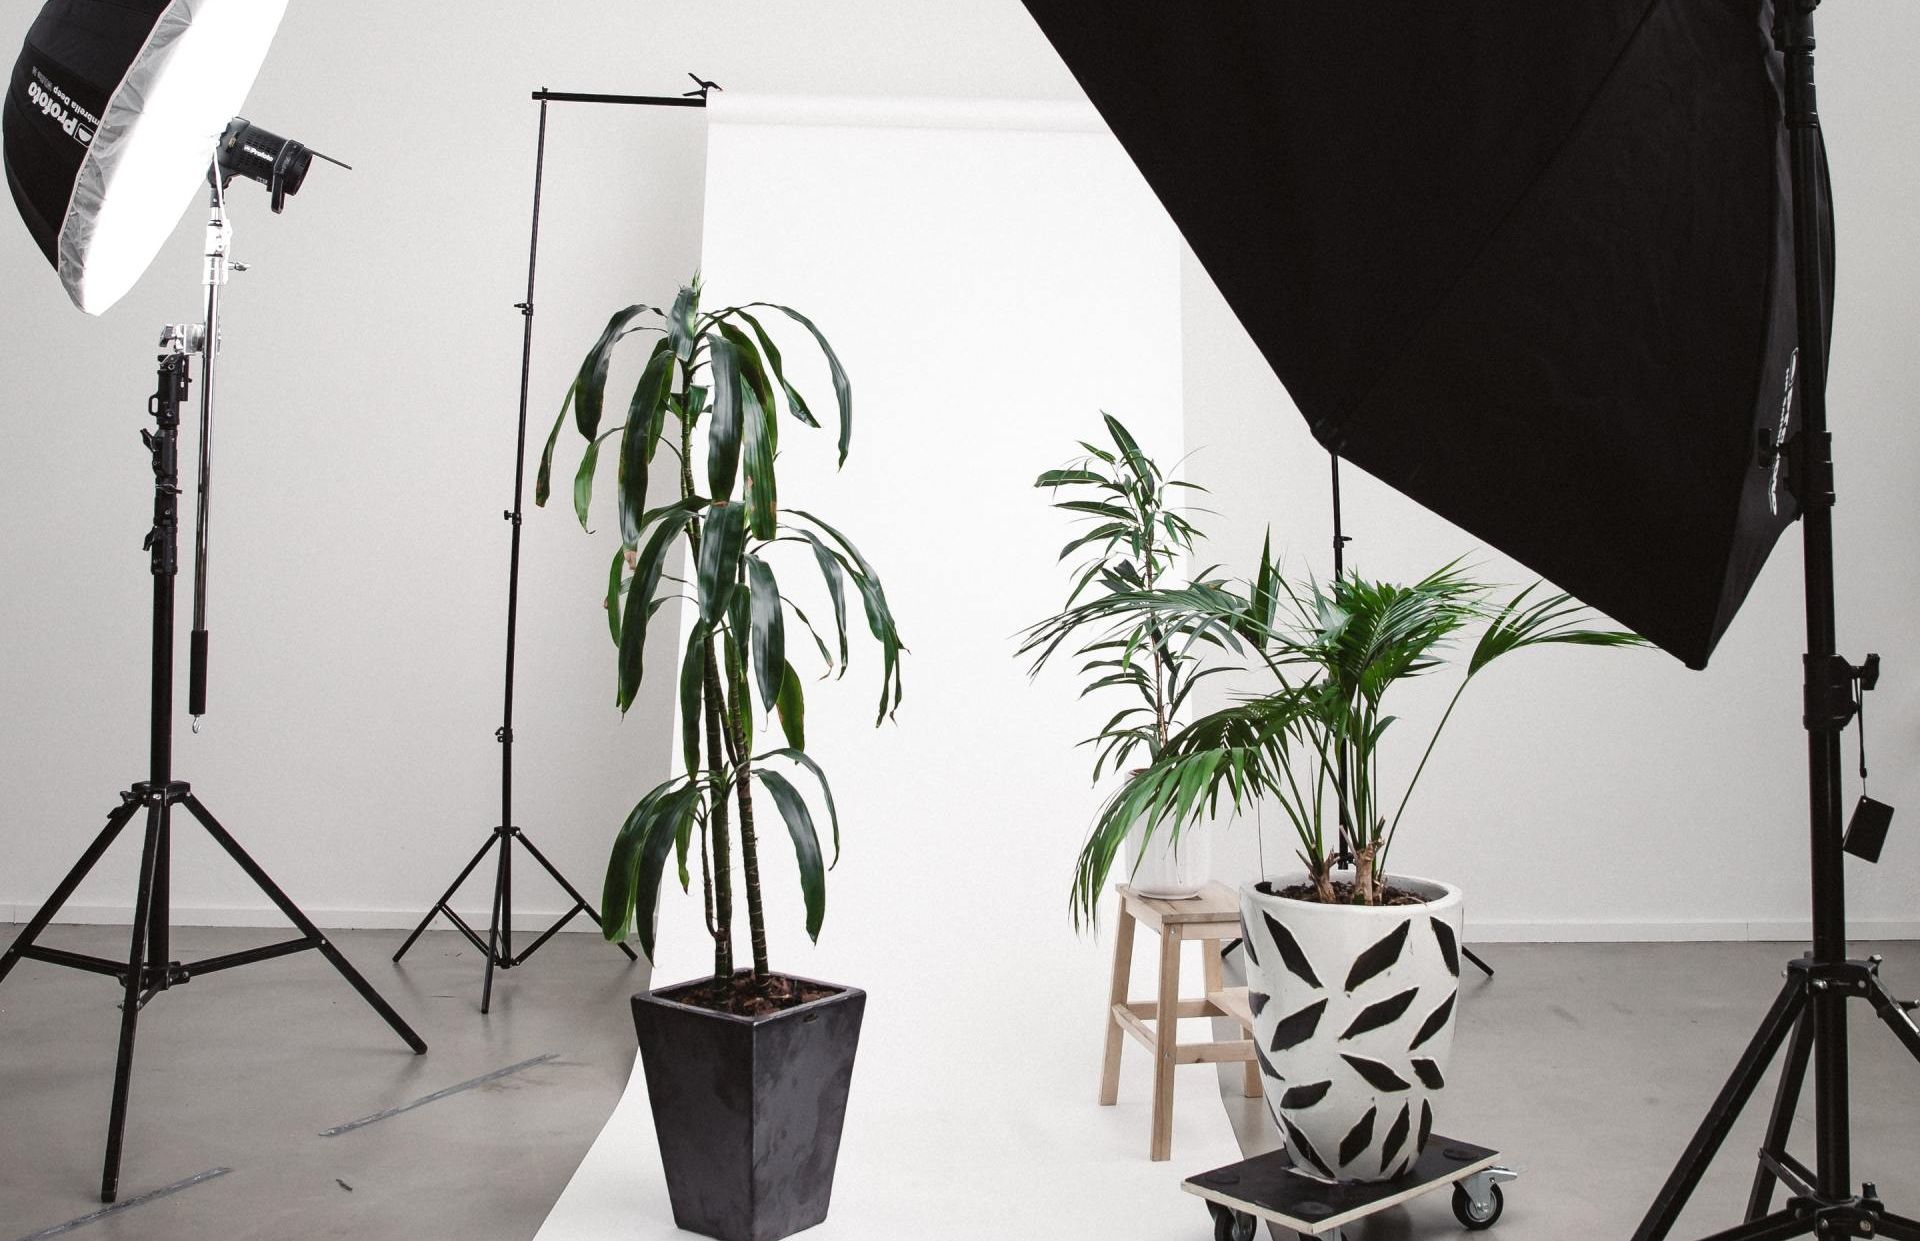 A photo studio with potted plants and lighting equipment